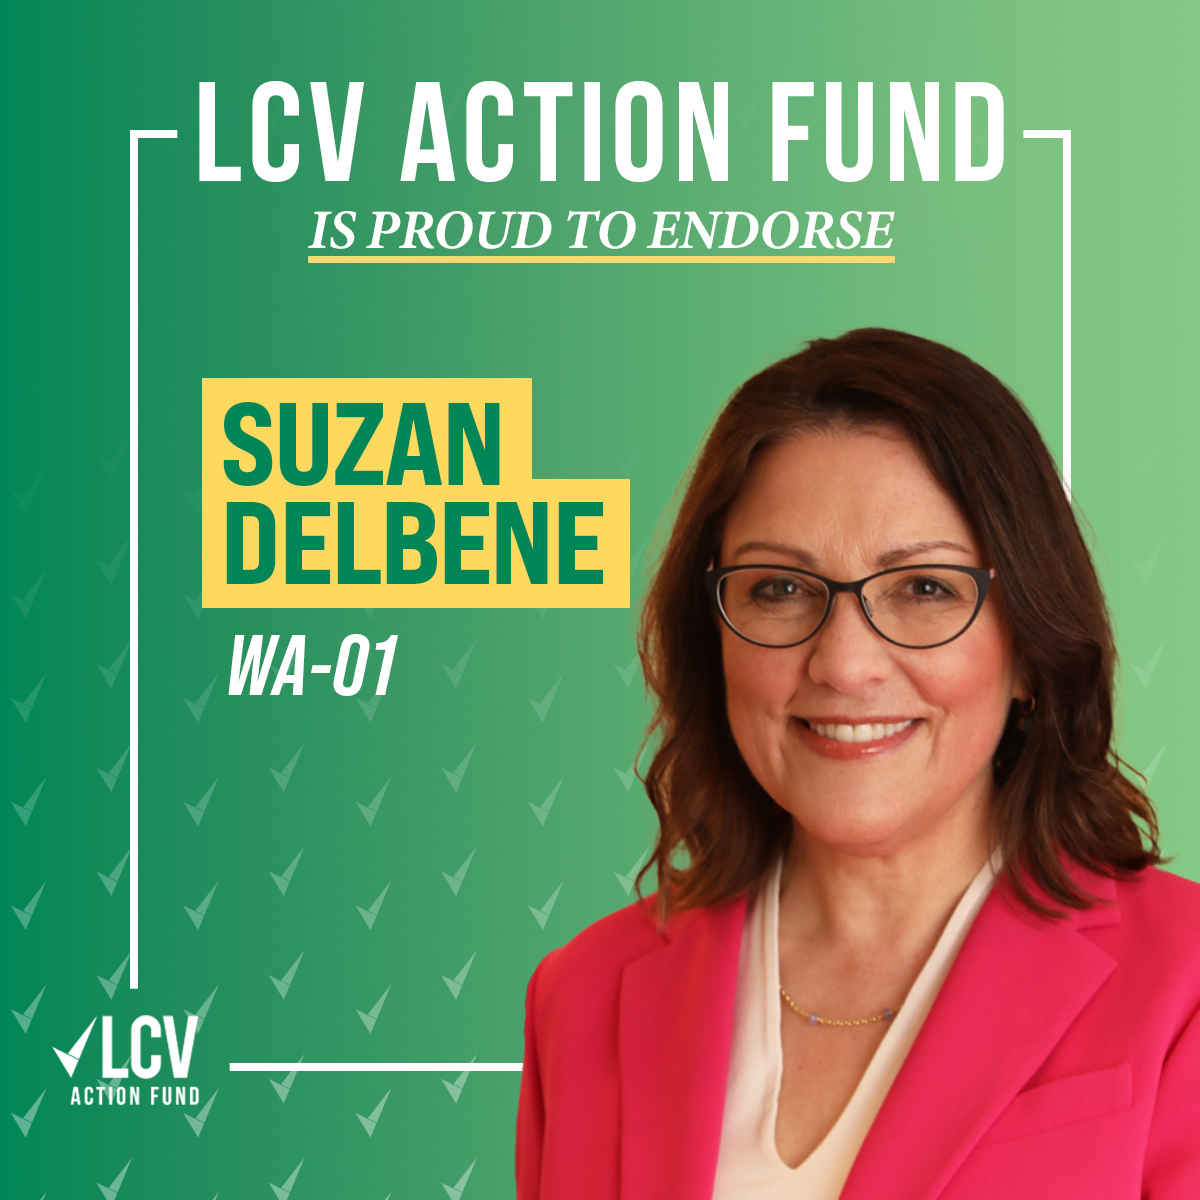 .@SuzanDelbene understands that climate change is a serious threat to our way of life, economy, and the future of our planet. #LCVAF is proud to endorse her for reelection in #WA01 where we know she will continue to champion bold environmental solutions.